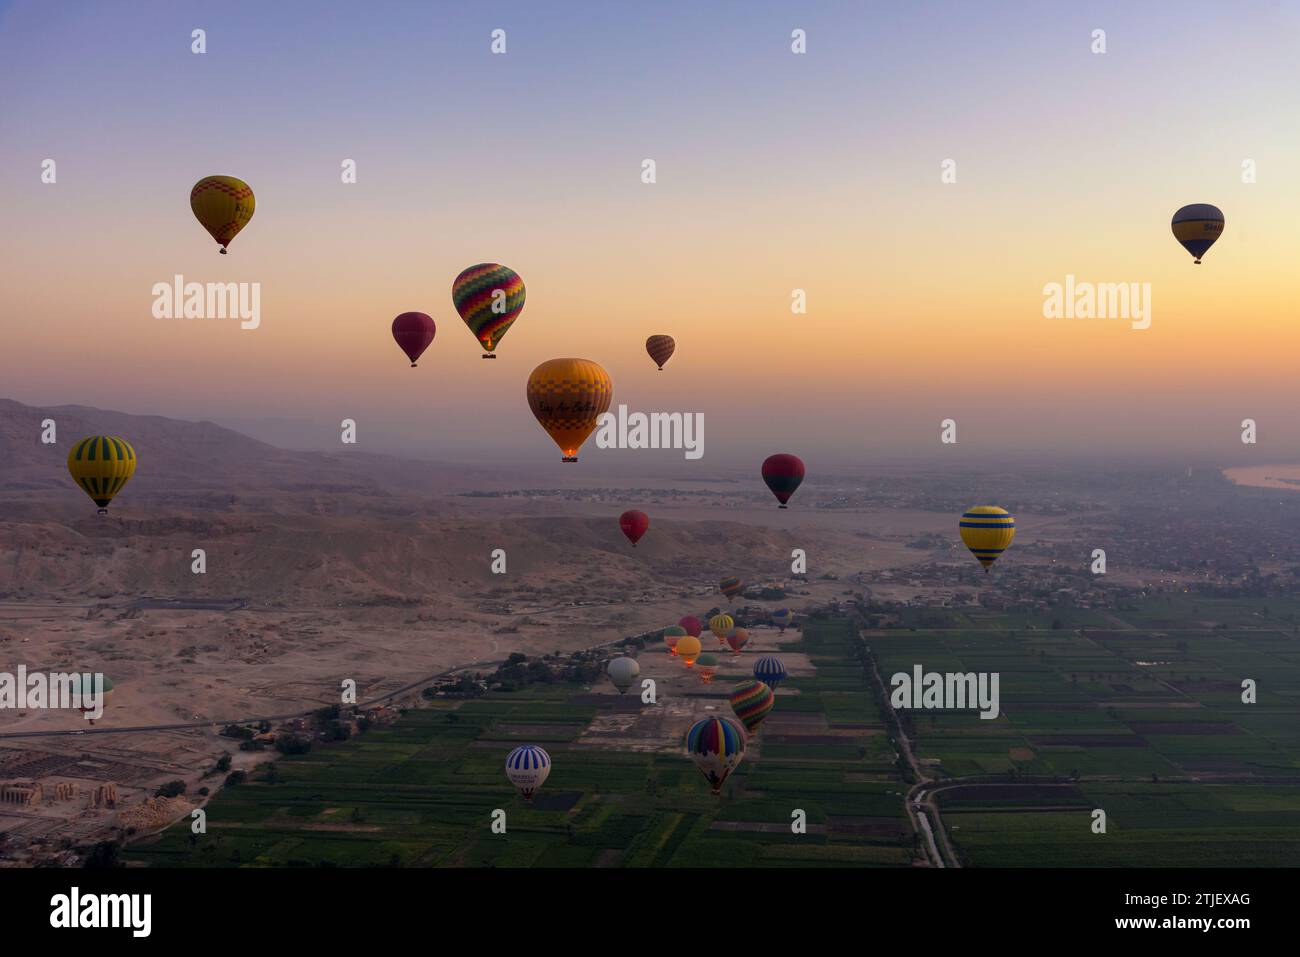 Hot air balloons over the Valley of the Kings. Sunrise balloon ride over the Valley of the Kings, Luxor, Egypt. Al ‘Asāsīf, New Valley, Egypt Stock Photo